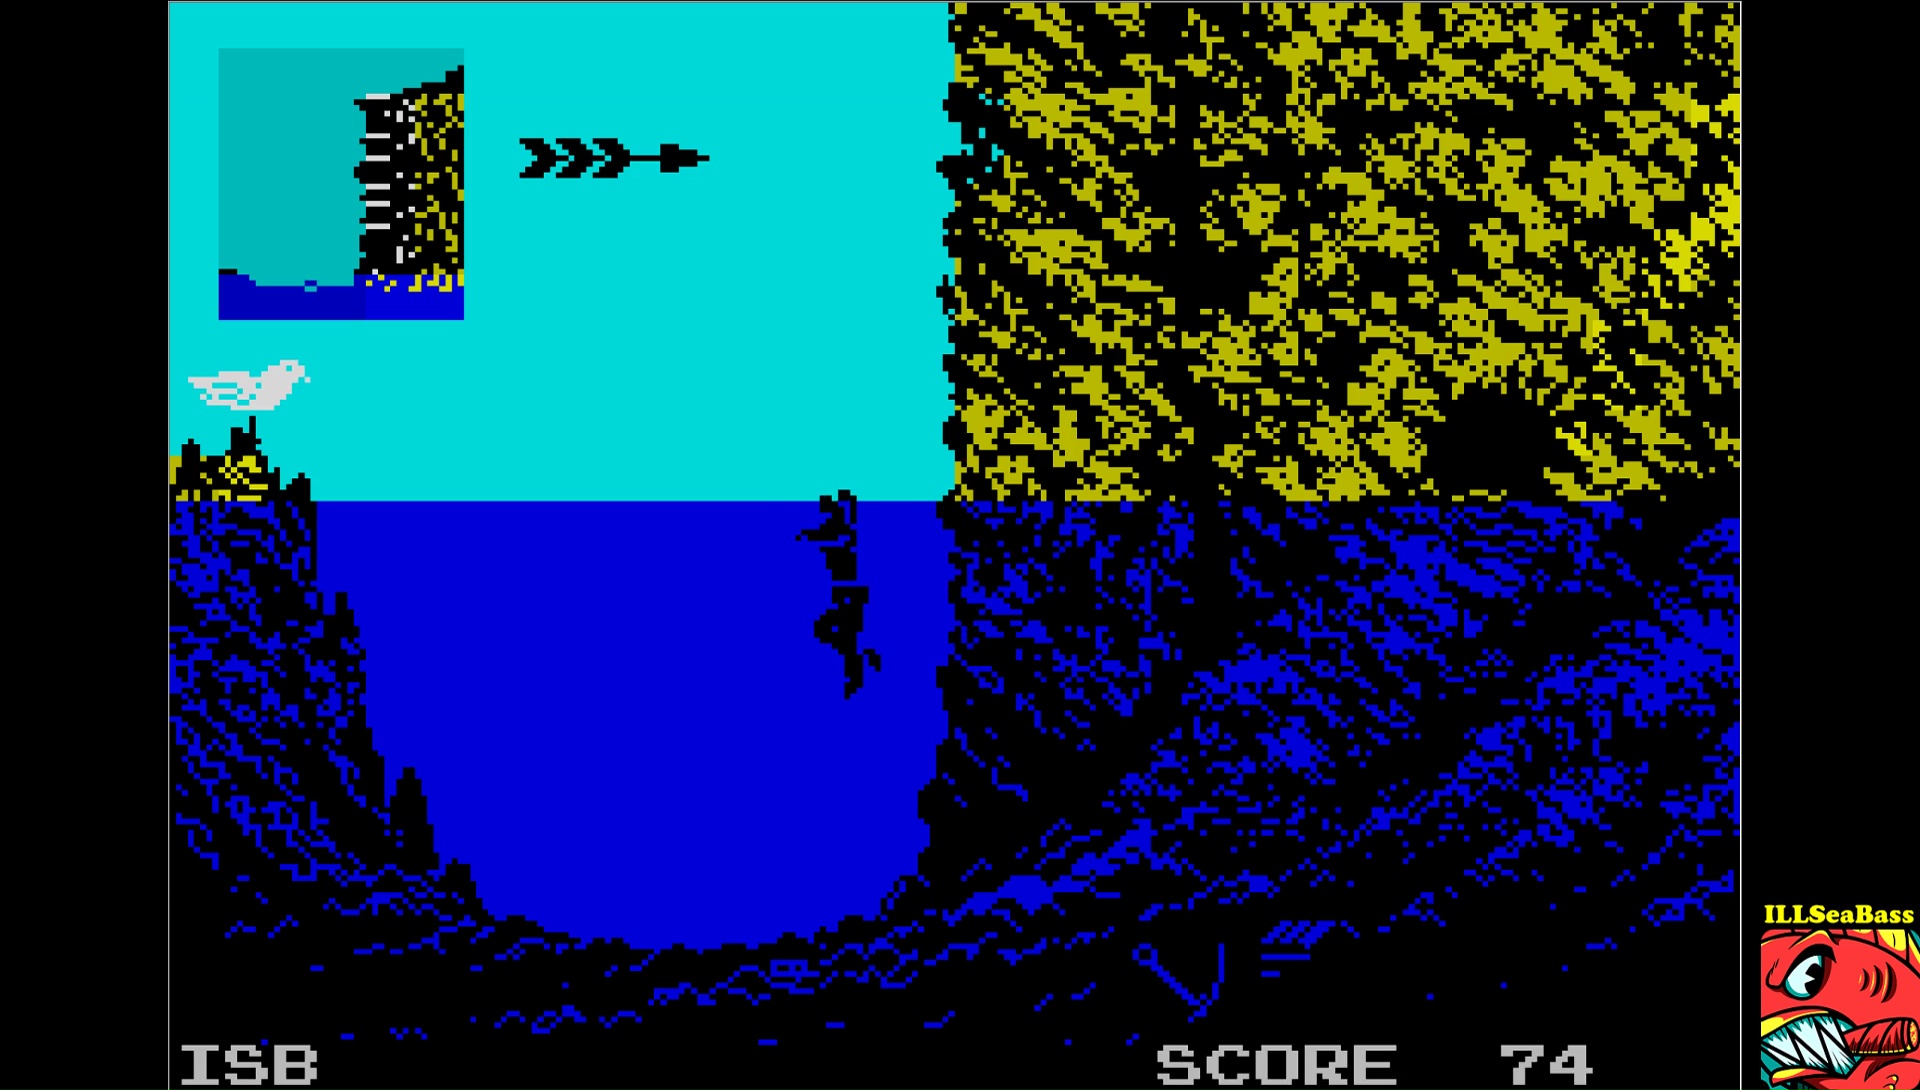 ILLSeaBass: World Games [Cliff Diving] (ZX Spectrum Emulated) 74 points on 2017-08-28 11:43:09